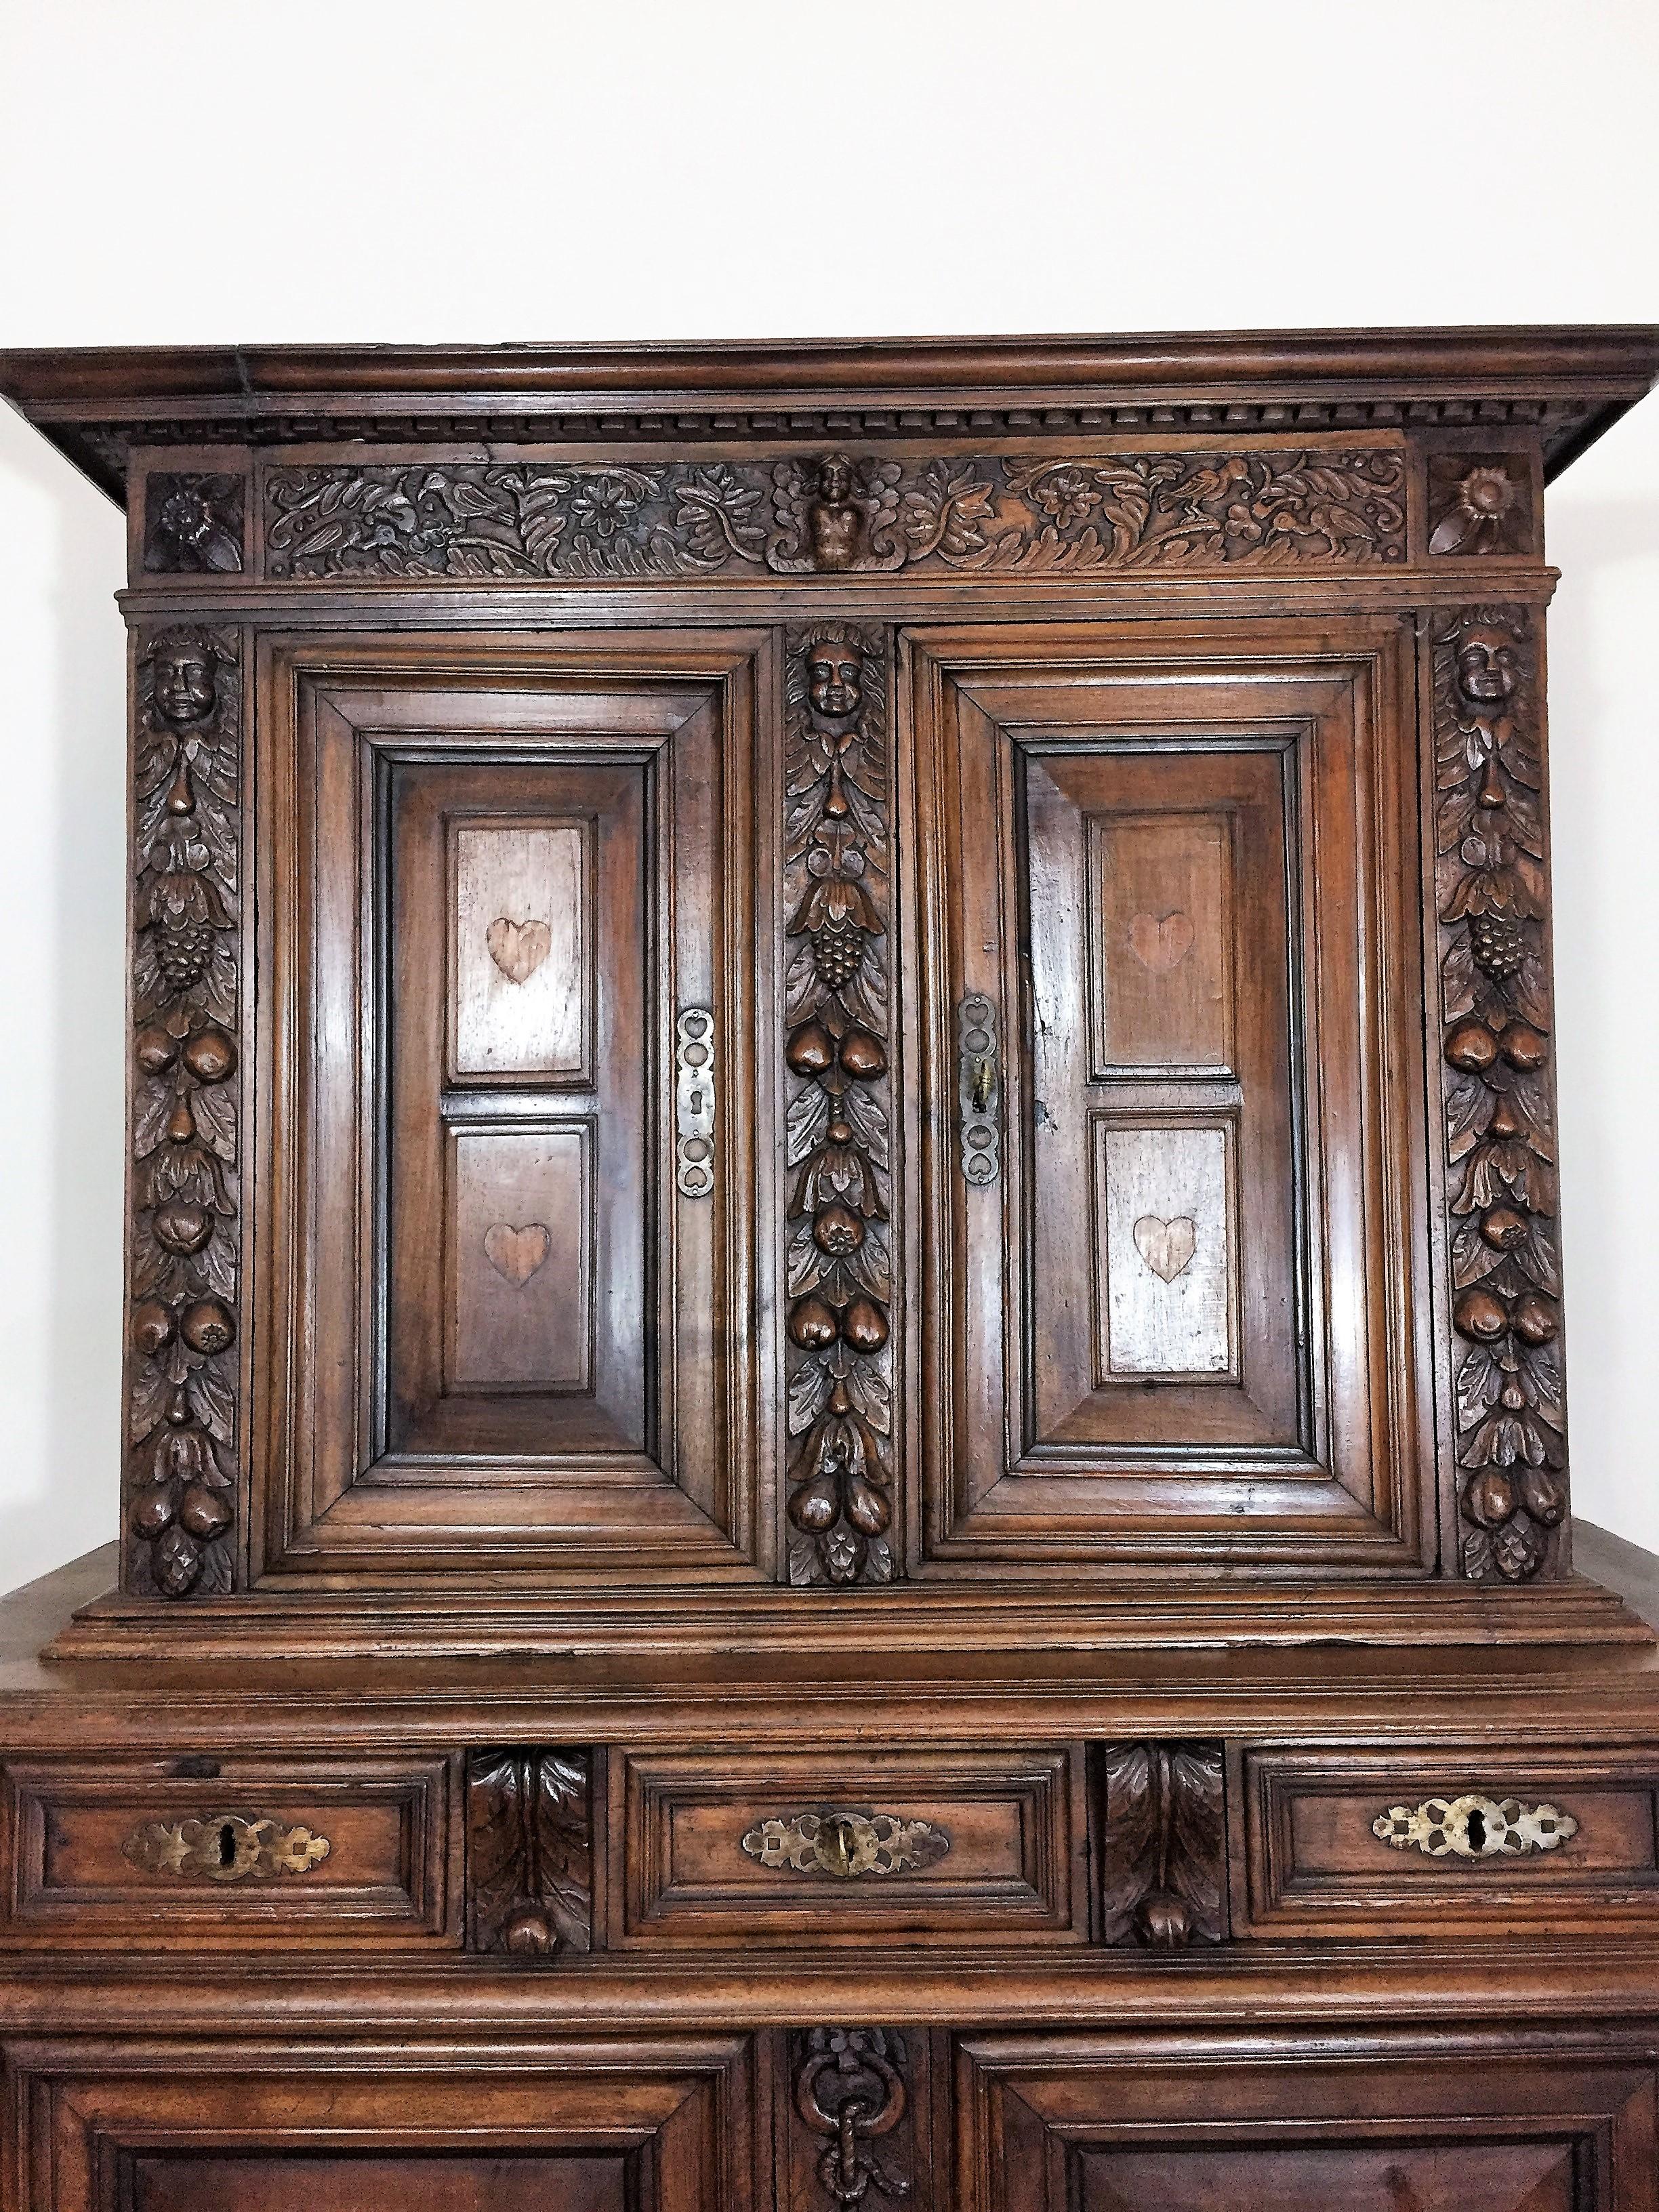 From a Norman manor house of the 16th century this very nice double trunk with four-door buffet decorated with inlaid hearts for the upper part and geometric motifs in the lower part. The three drawers in the central part with wrought iron keyholes